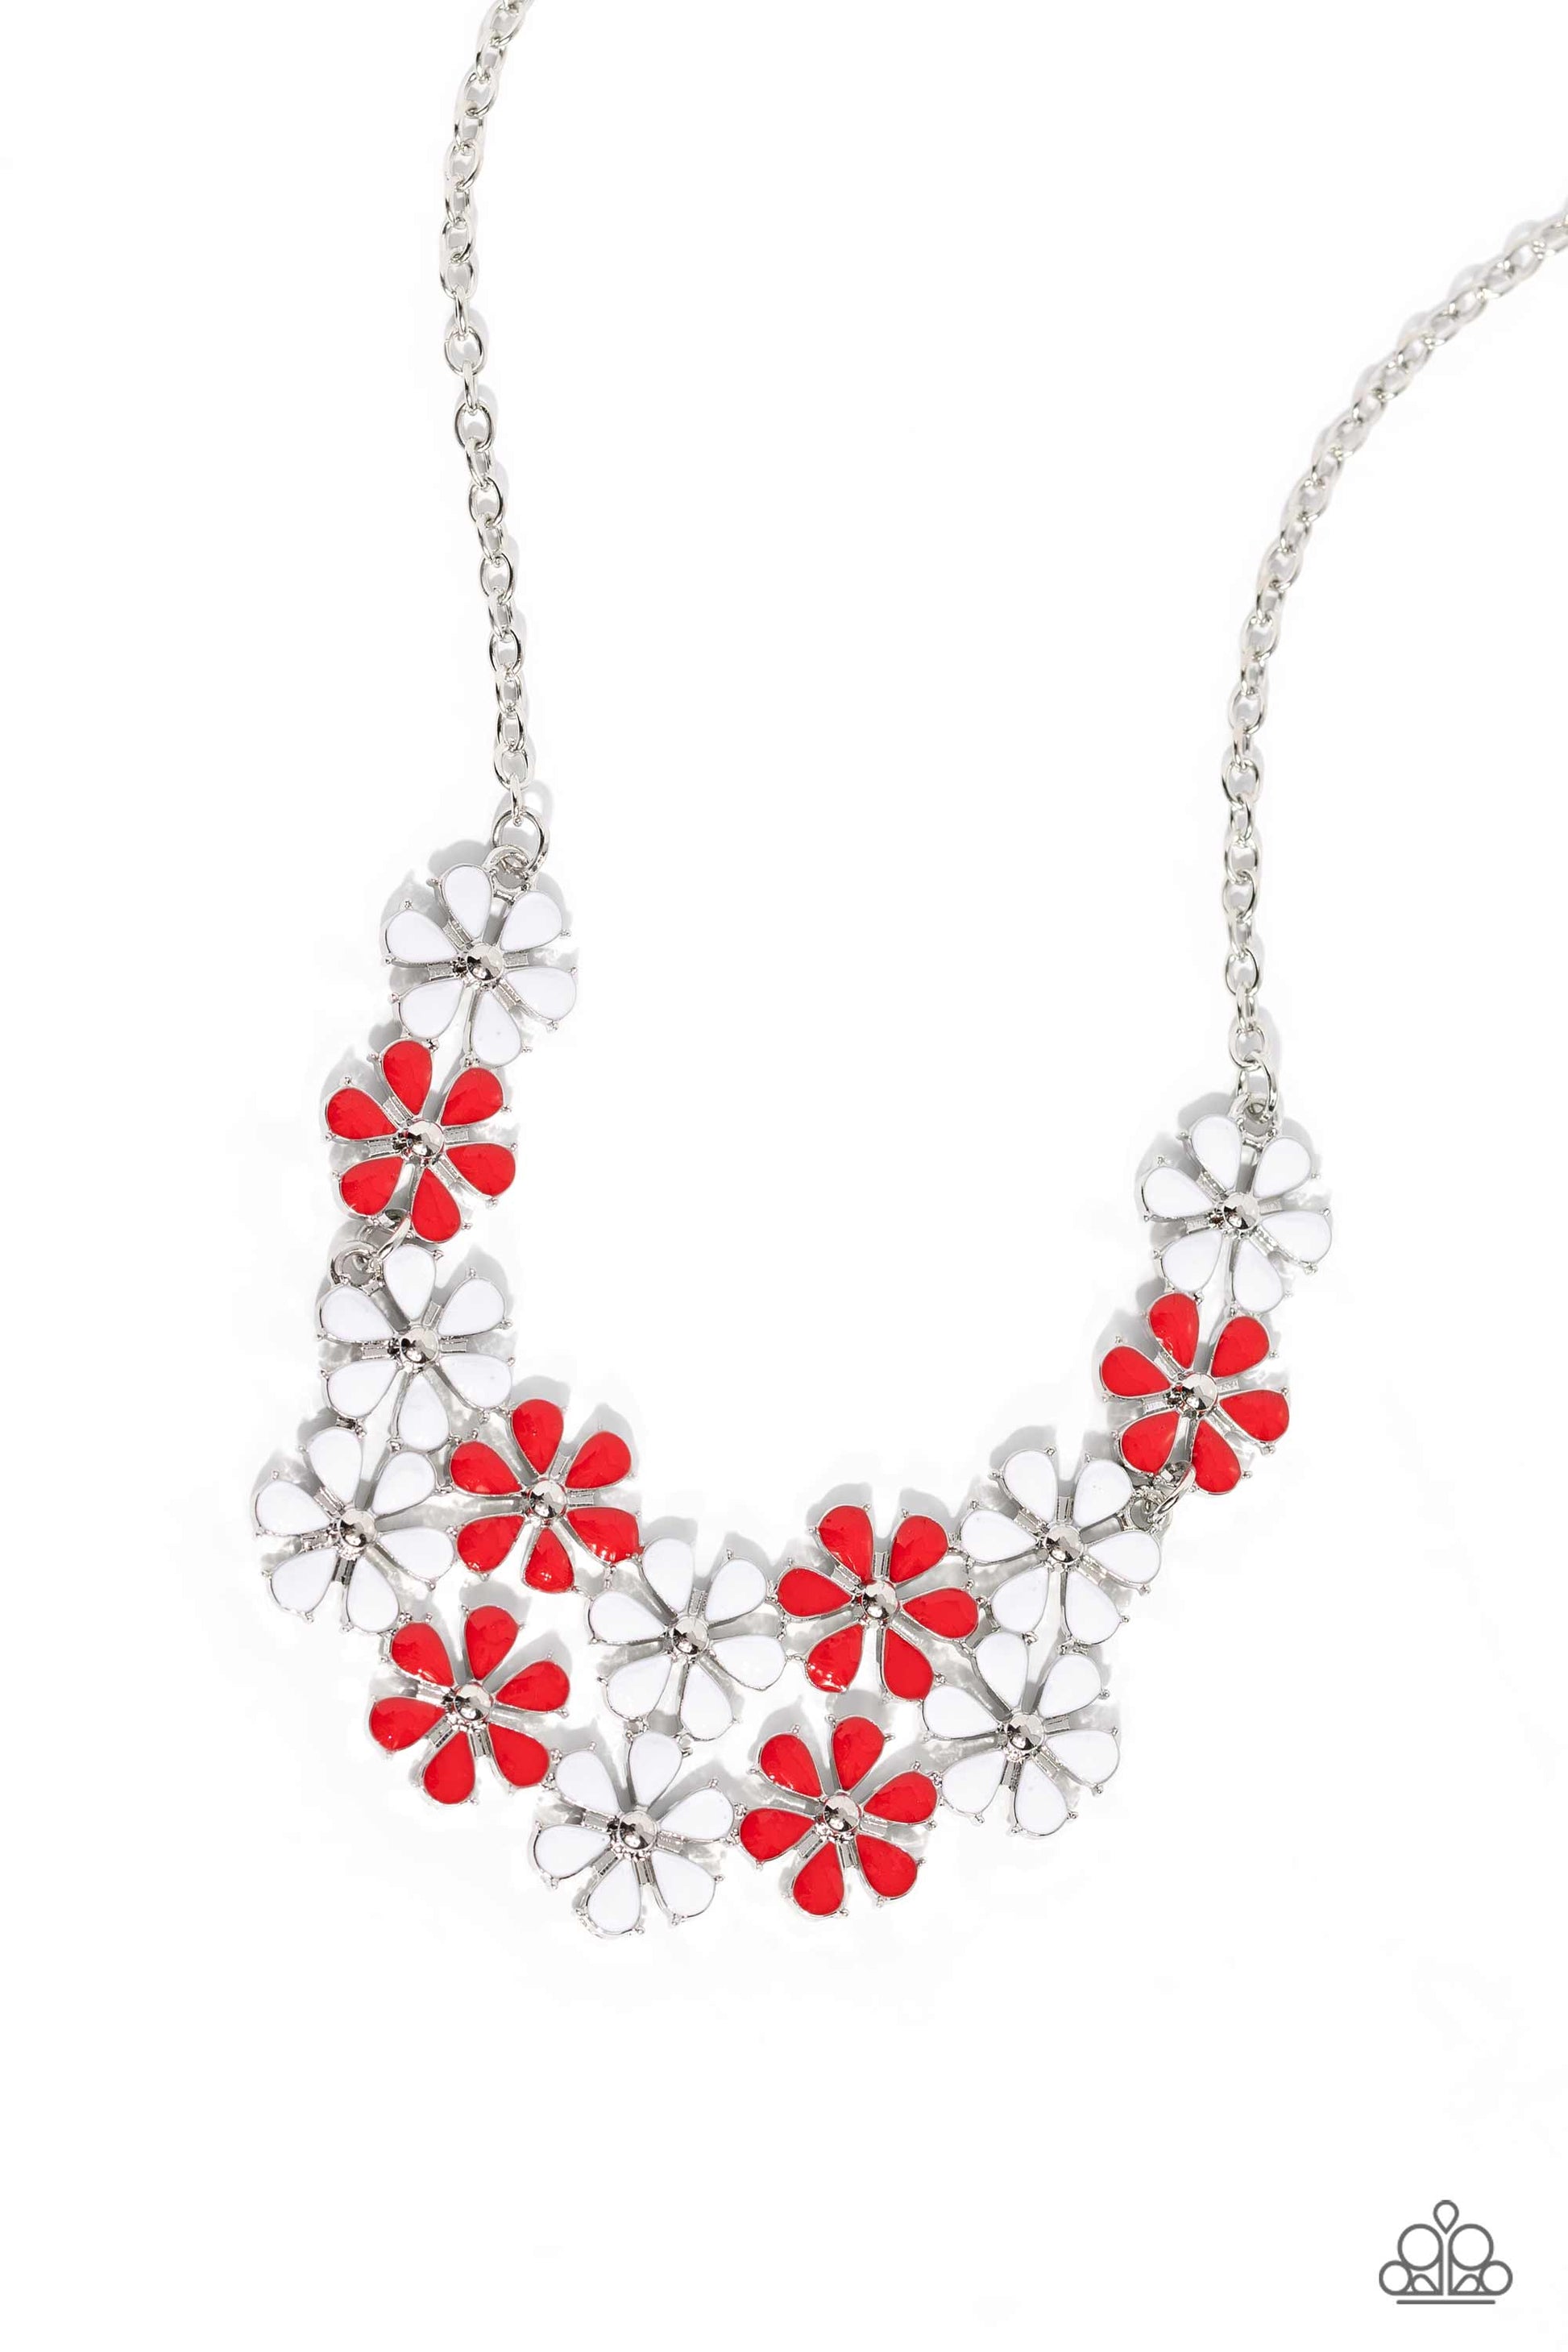 Floral Fever Red Necklace - Paparazzi Accessories  Painted in vivacious shades of red and white, a collection of silver studded flowers glide across the chest from a dainty silver chain for a whimsical array. Features an adjustable clasp closure.  Sold as one individual necklace. Includes one pair of matching earrings.  P2WH-RDXX-332PX